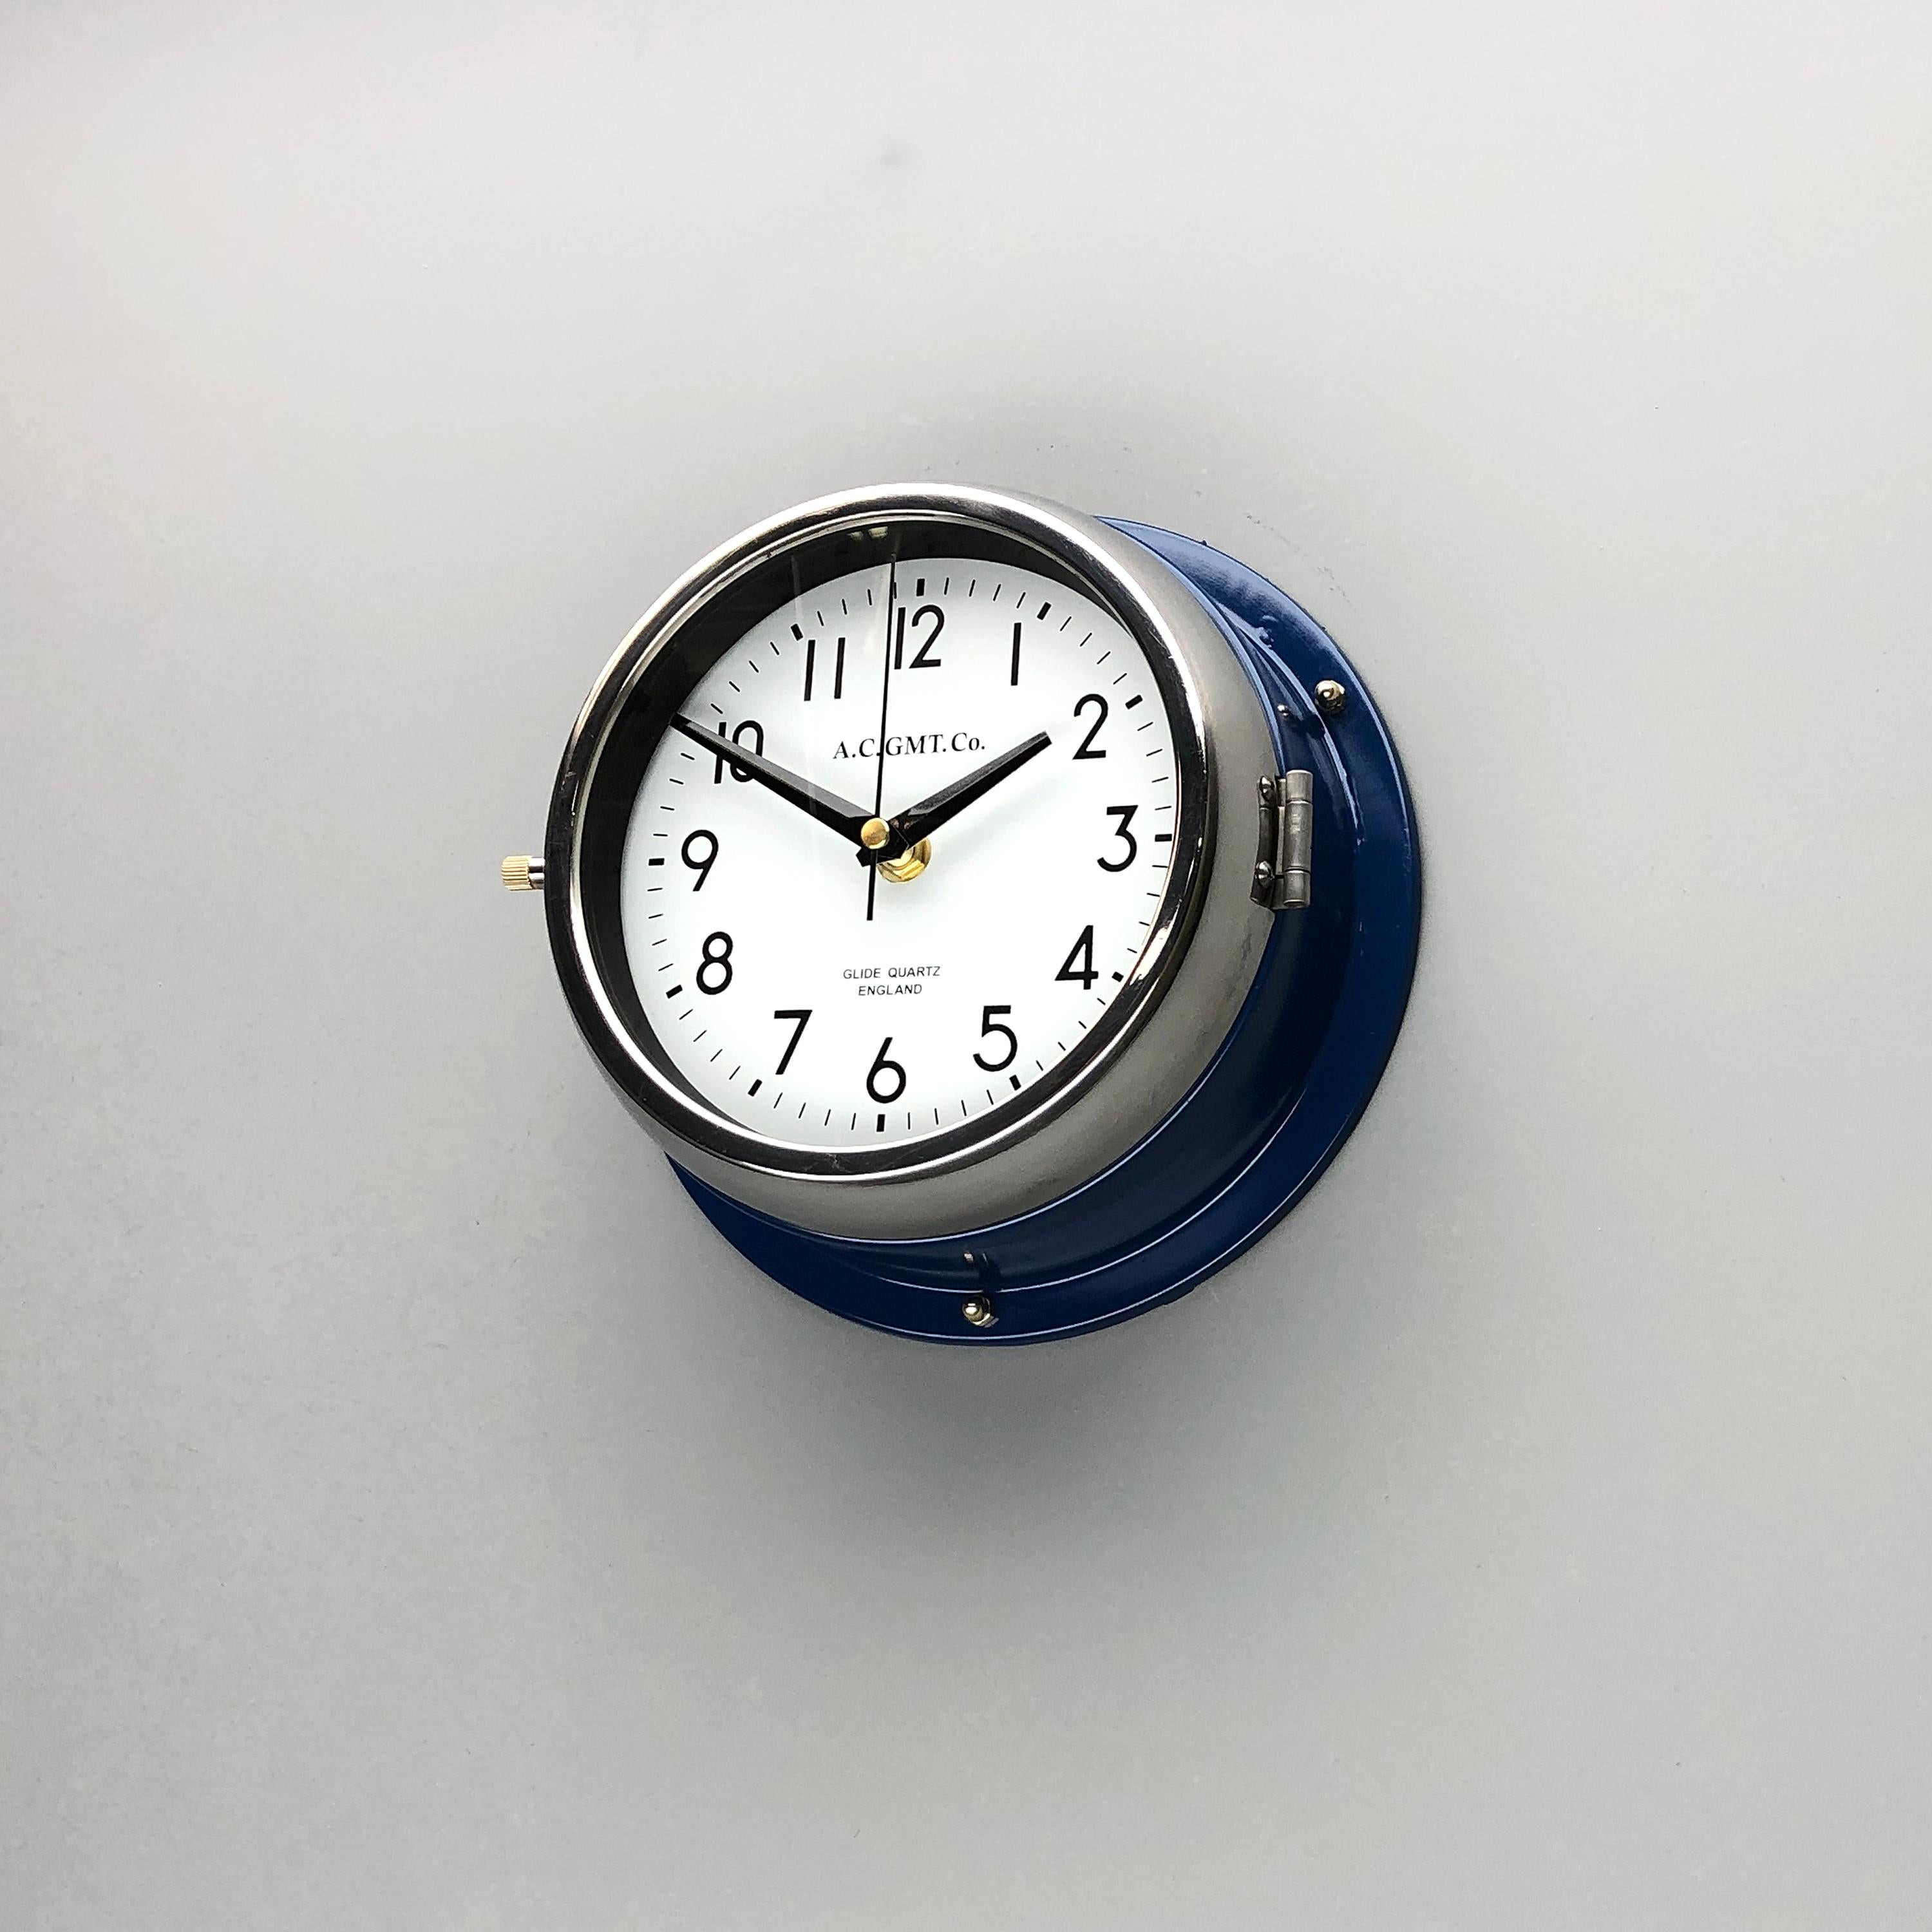 English 1970s British Classic Blue & Chrome Ac Gmt Co. Industrial Wall Clock White Dial For Sale